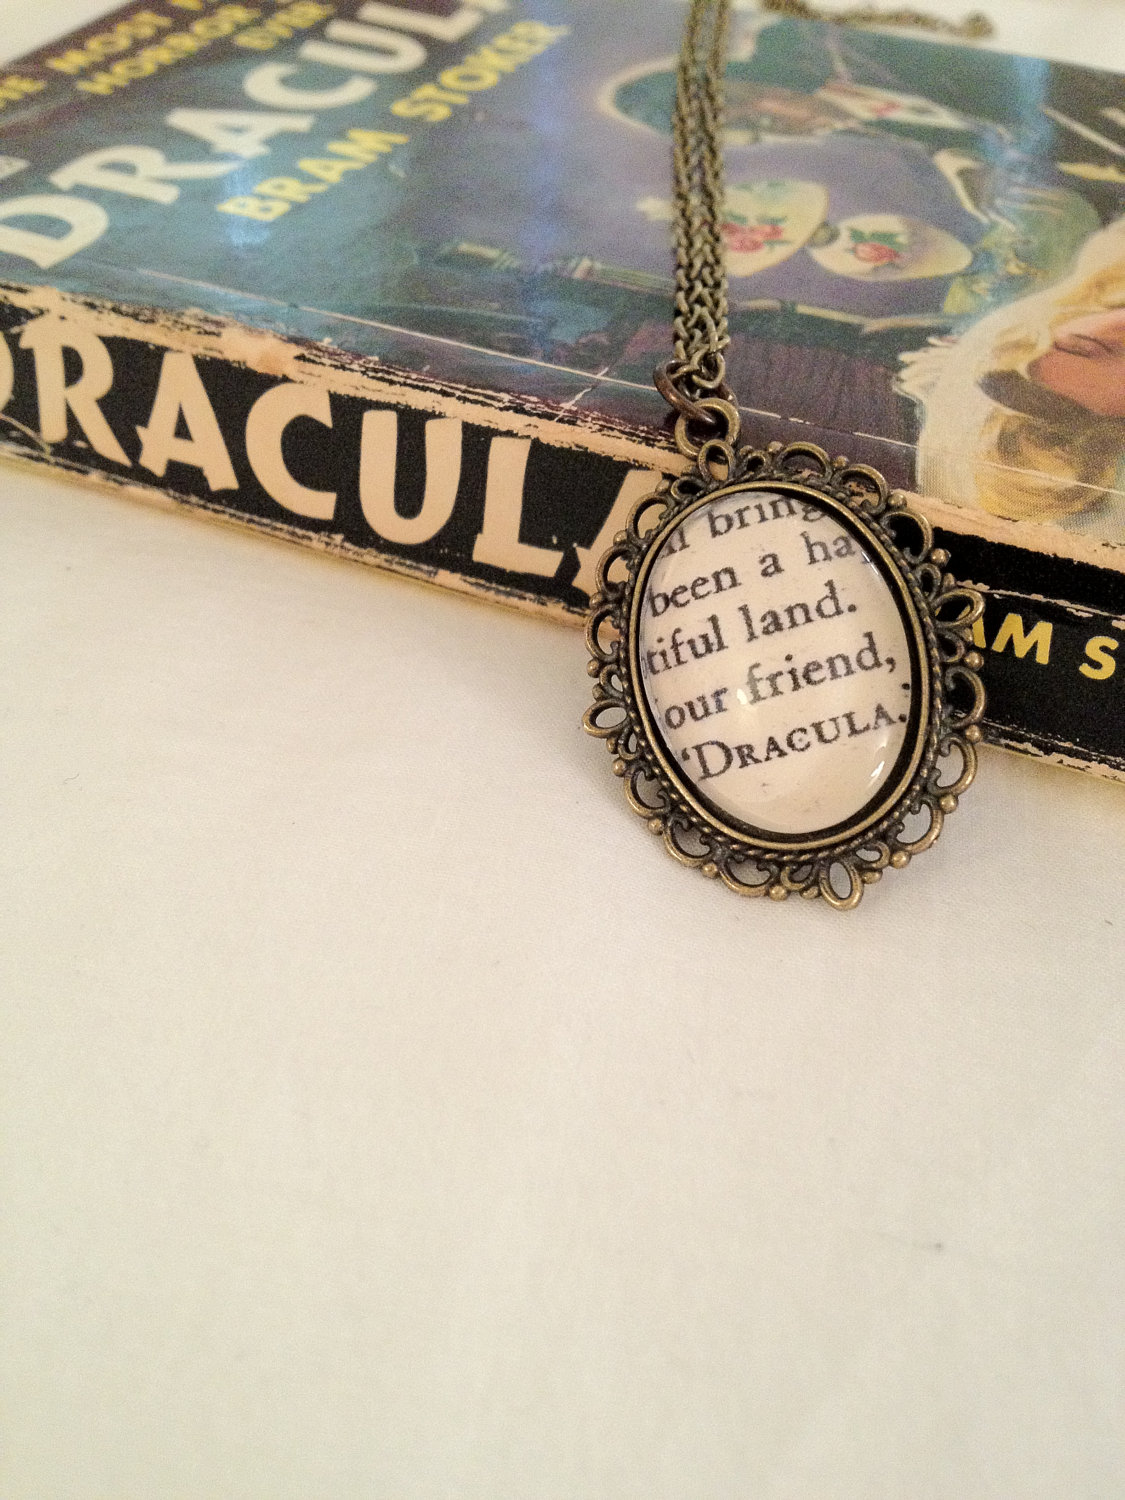 Bram Stoker's Dracula Antiqued Bronze Victorian Literature Book Page Necklace